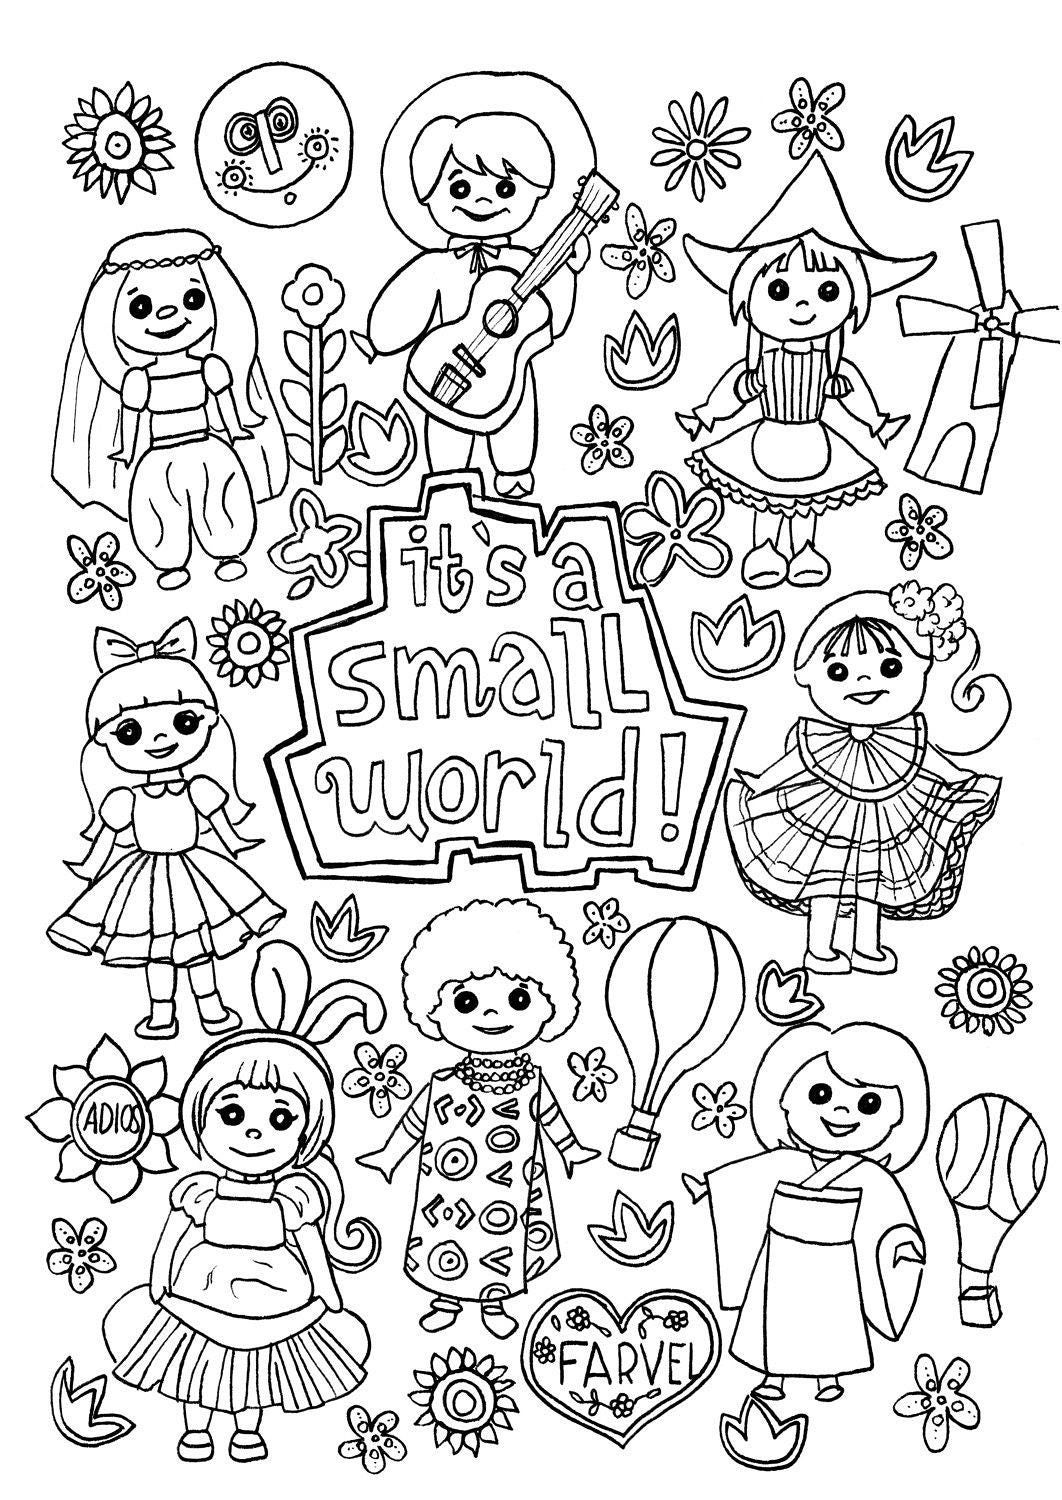 Its a Small World Coloring Page Digital Download Disney | Etsy